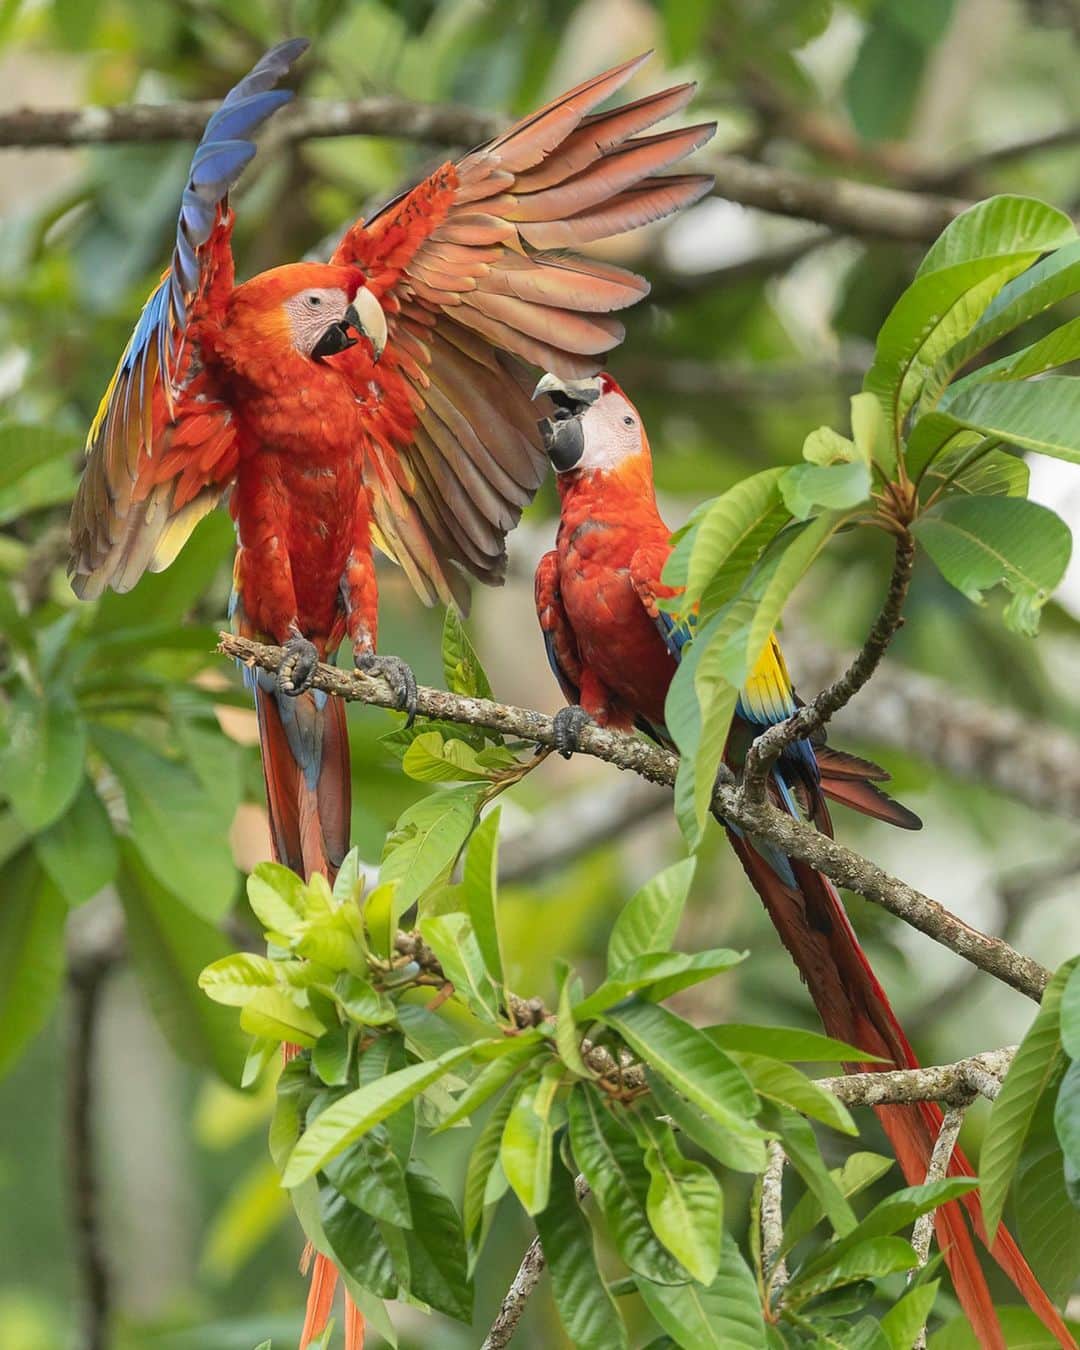 Tim Lamanのインスタグラム：「Photos by @TimLaman.  Happy Earth Day a little late!  But every day is earth day, right?  And I’m in an amazing location documenting one of the avian spectacles of our planet.  A Scarlet Macaw pair engage in a little social bonding…. Greetings again from Chiapas, Mexico, where I’m currently working with @natura_mexicana to document their work to conserve this endangered Central American subspecies of Scarlet Macaw in the Montes Azules Biosphere Reserve and the surrounding landscape.  Learn more at www.naturamexicana.org.mx.   #macaw #scarletmacaw #parrot #parrotlovers #mexico #birds #birdphotography #birdsofinstagram #cornelllabofornithology @cornellbirds」